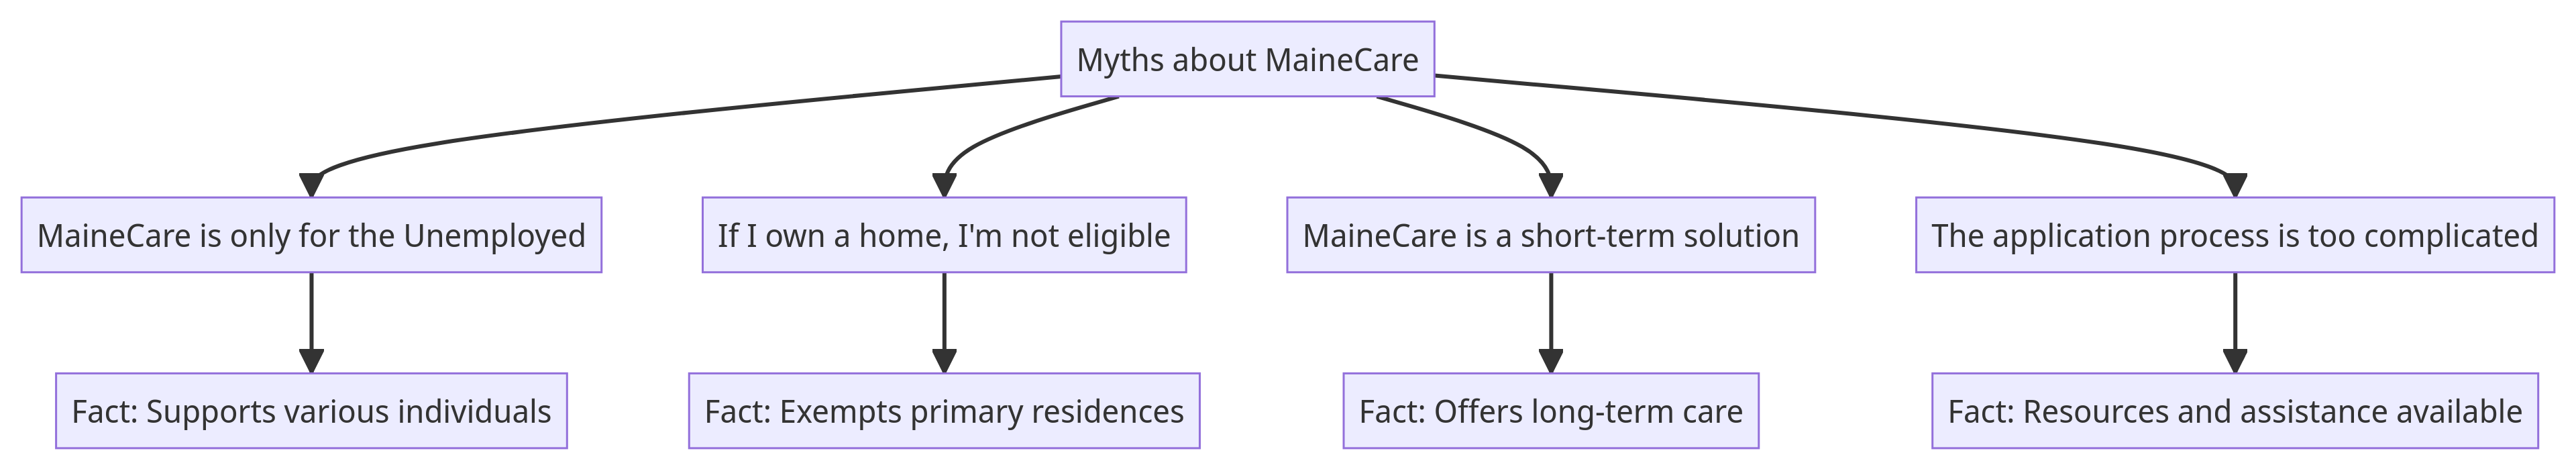 Myths about MaineCare